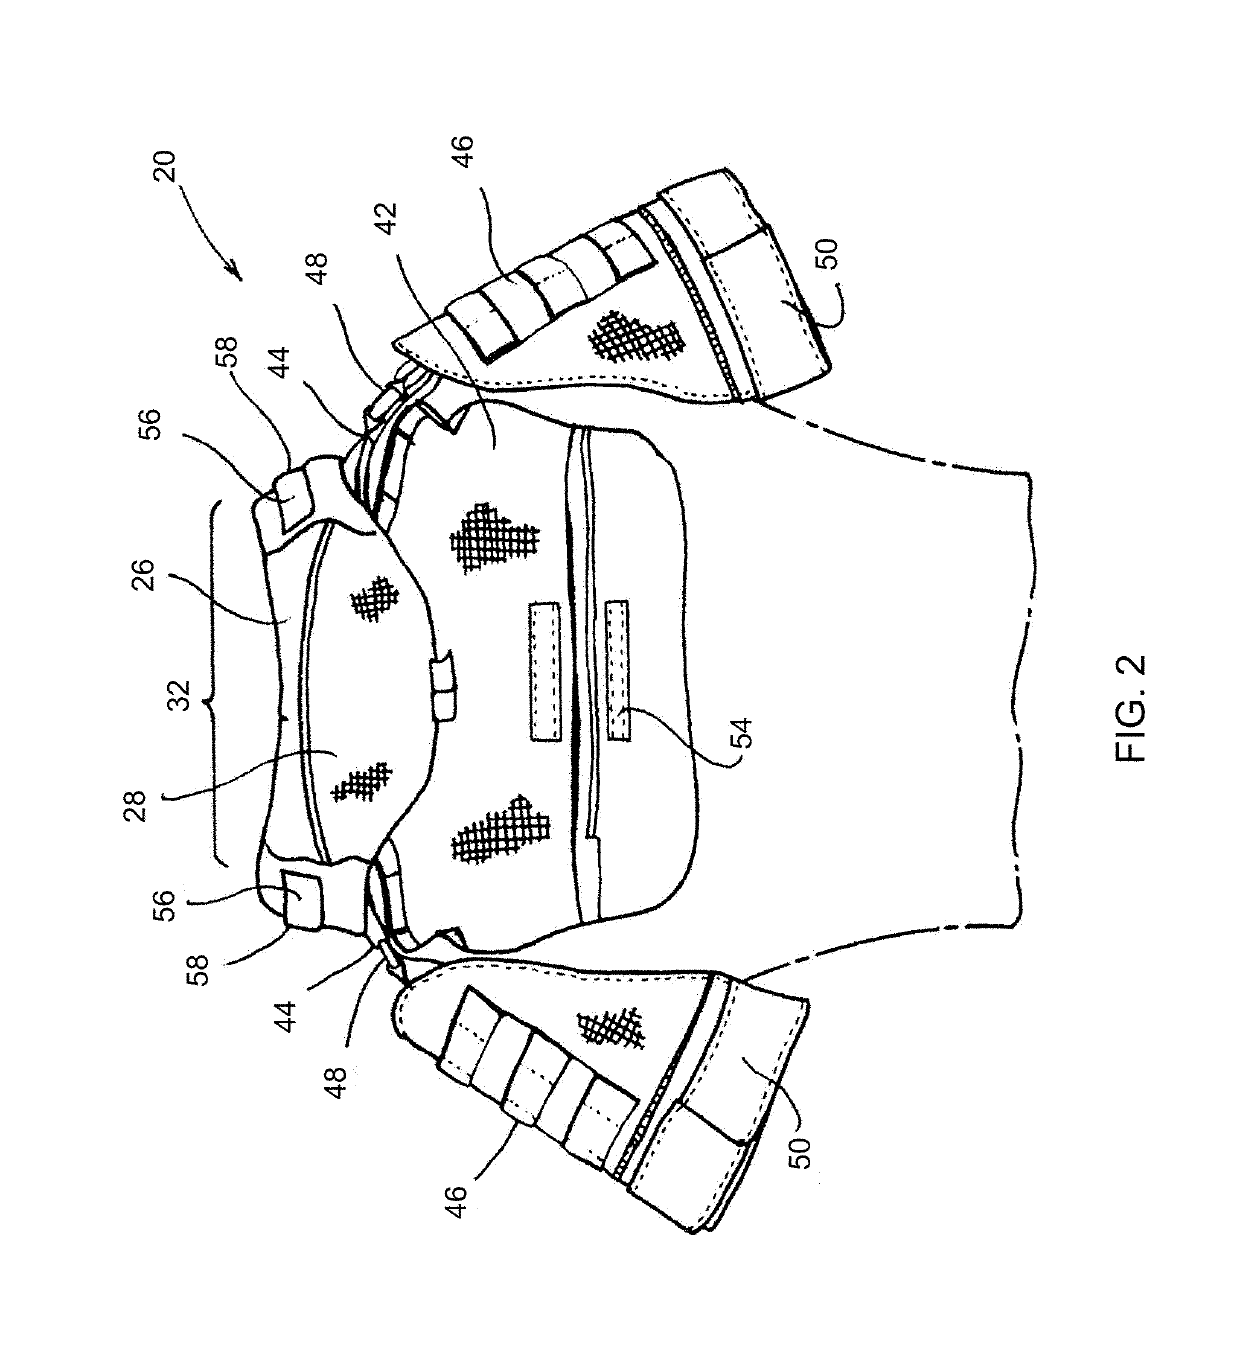 Modular armor supplement apparatus and system with silent fasteners and adjustability